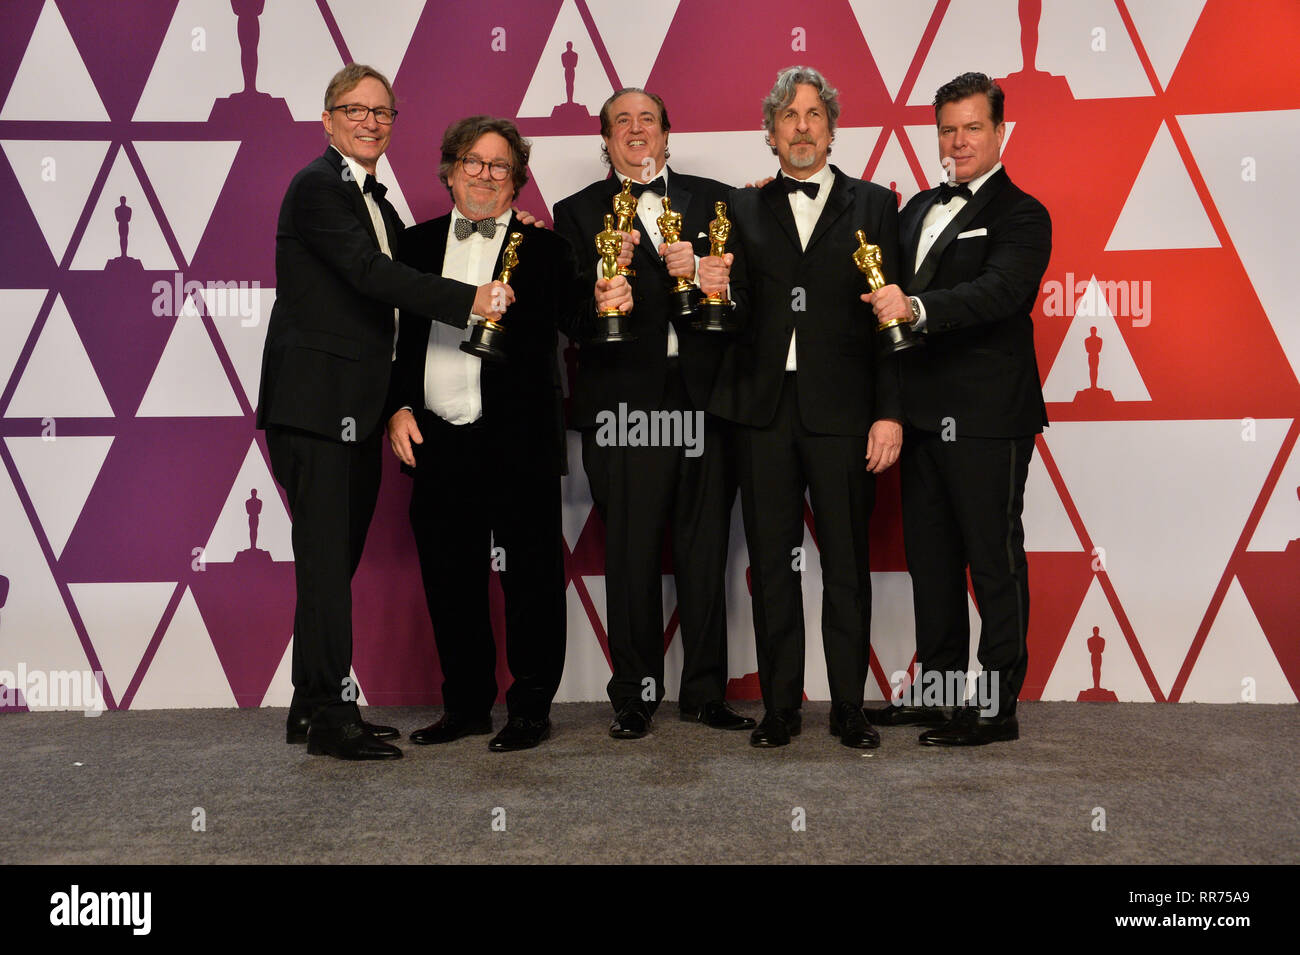 Los Angeles, USA. 24th Feb, 2019. LOS ANGELES, CA. February 24, 2019: Jim Burke, Charles B. Wessler, Brian Currie, Peter Farrelly & Nick Vallelongo at the 91st Academy Awards at the Dolby Theatre. Picture Credit: Paul Smith/Alamy Live News Credit: Paul Smith/Alamy Live News Stock Photo